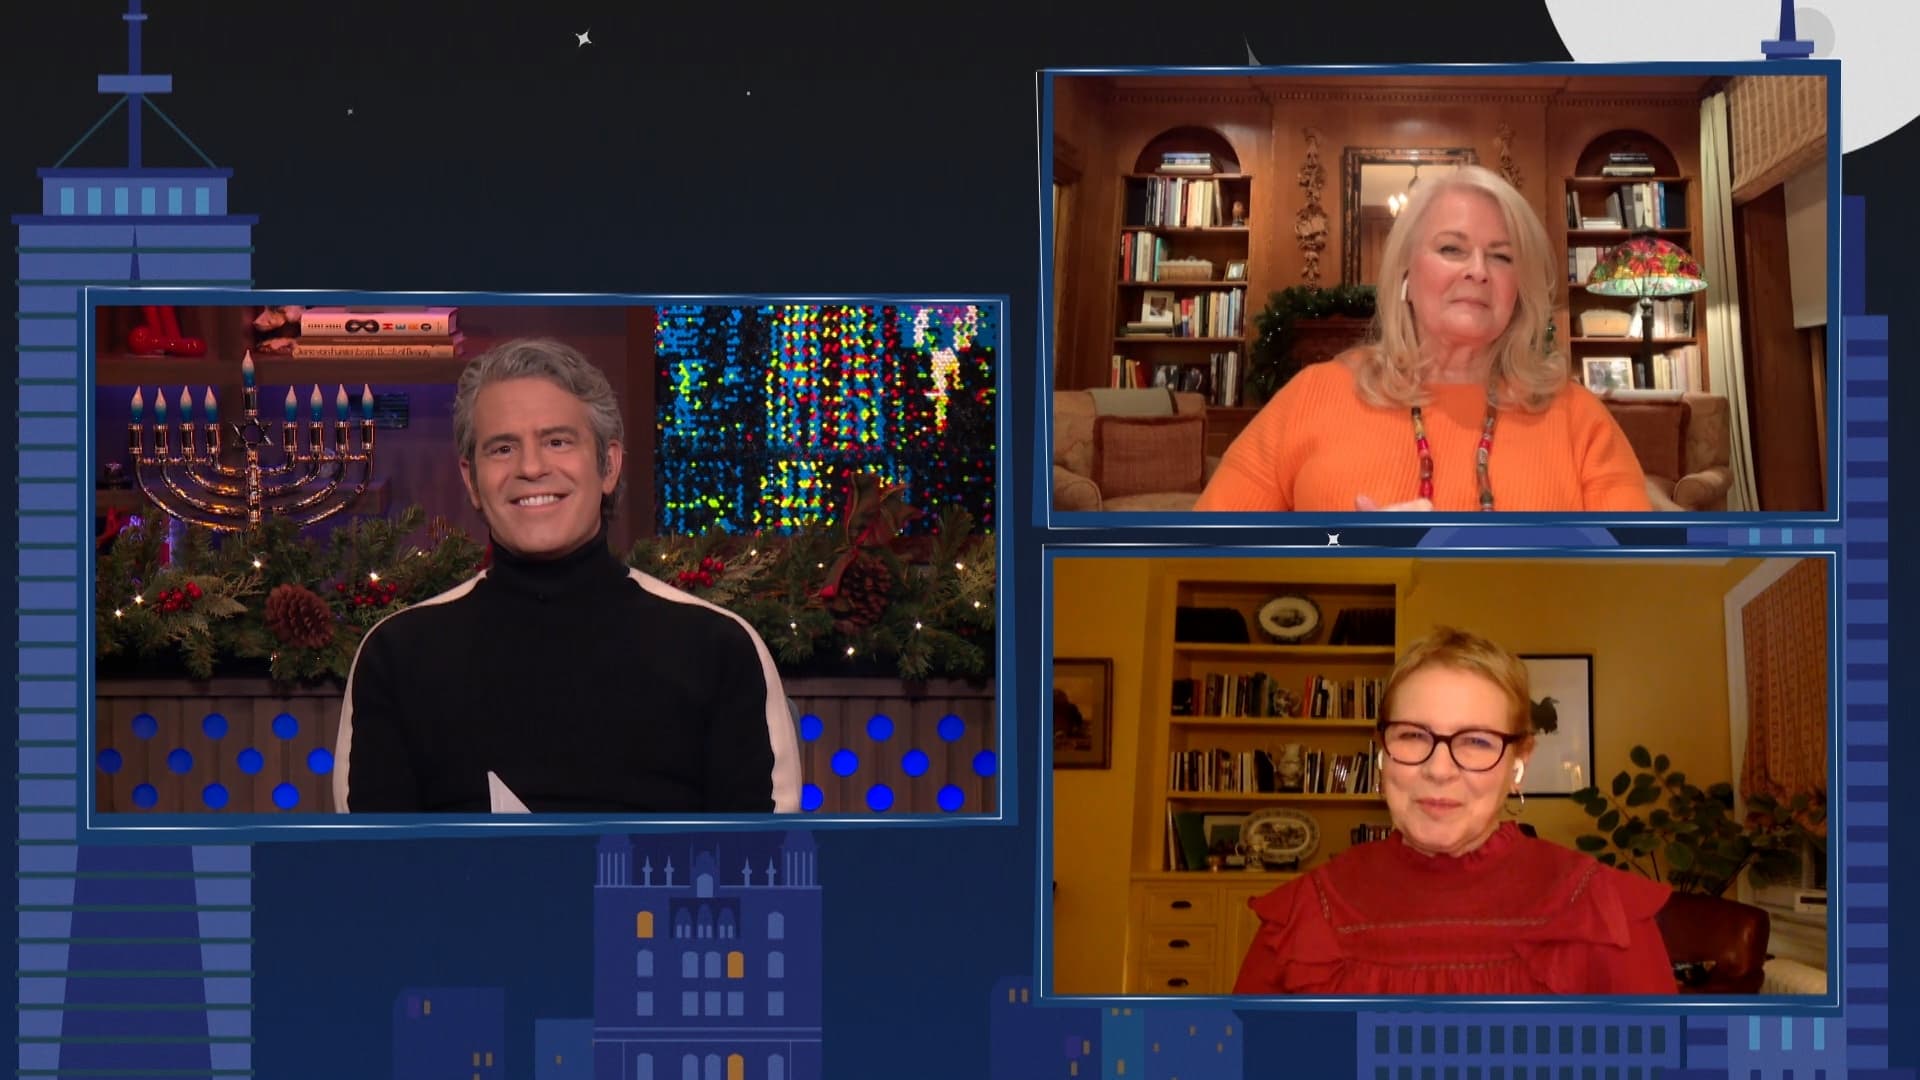 Watch What Happens Live with Andy Cohen Staffel 17 :Folge 199 